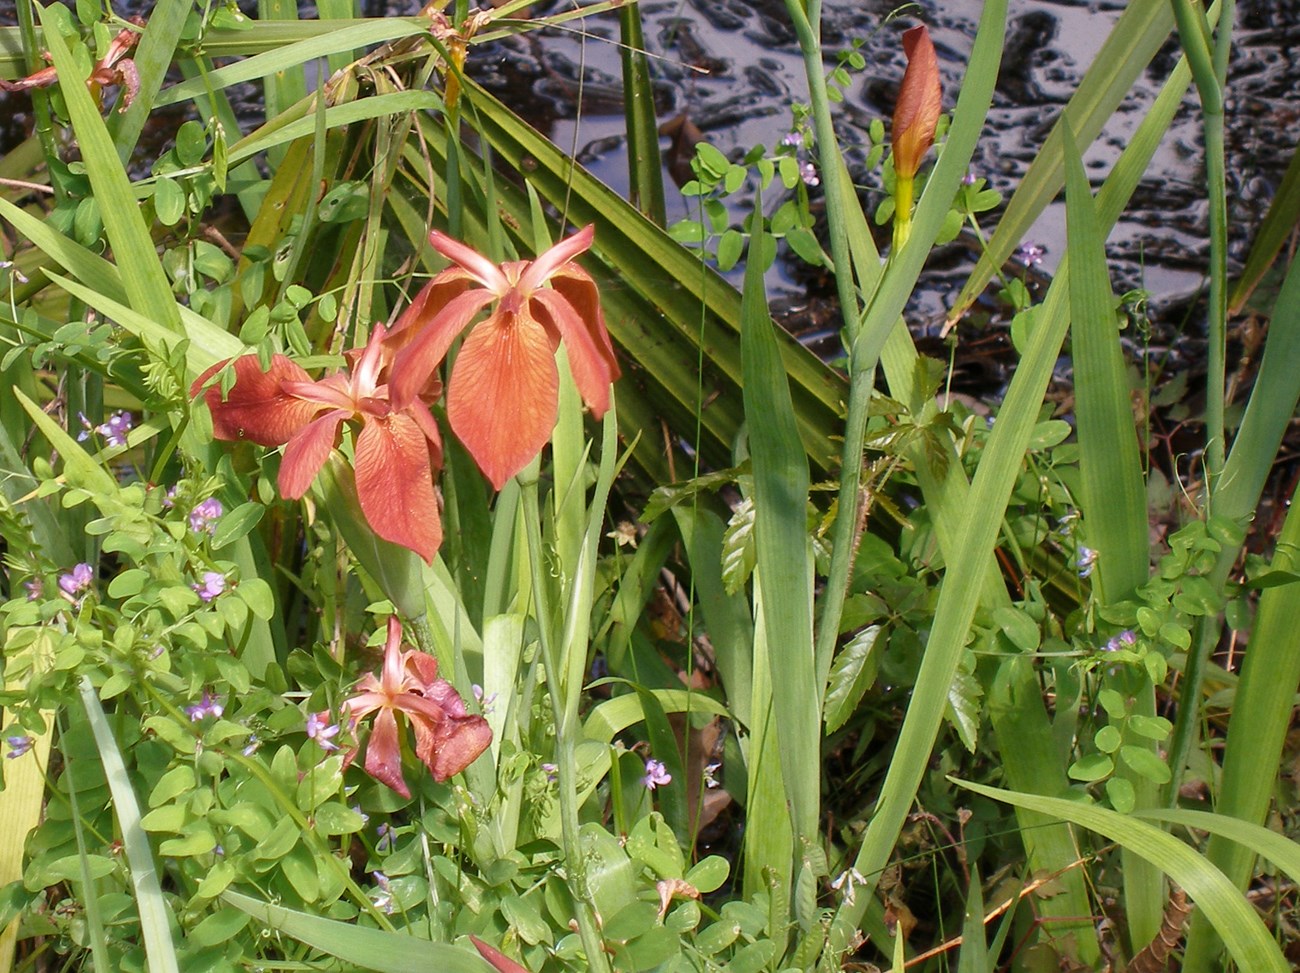 Four flowers with red petals. Green vegetation and water in background